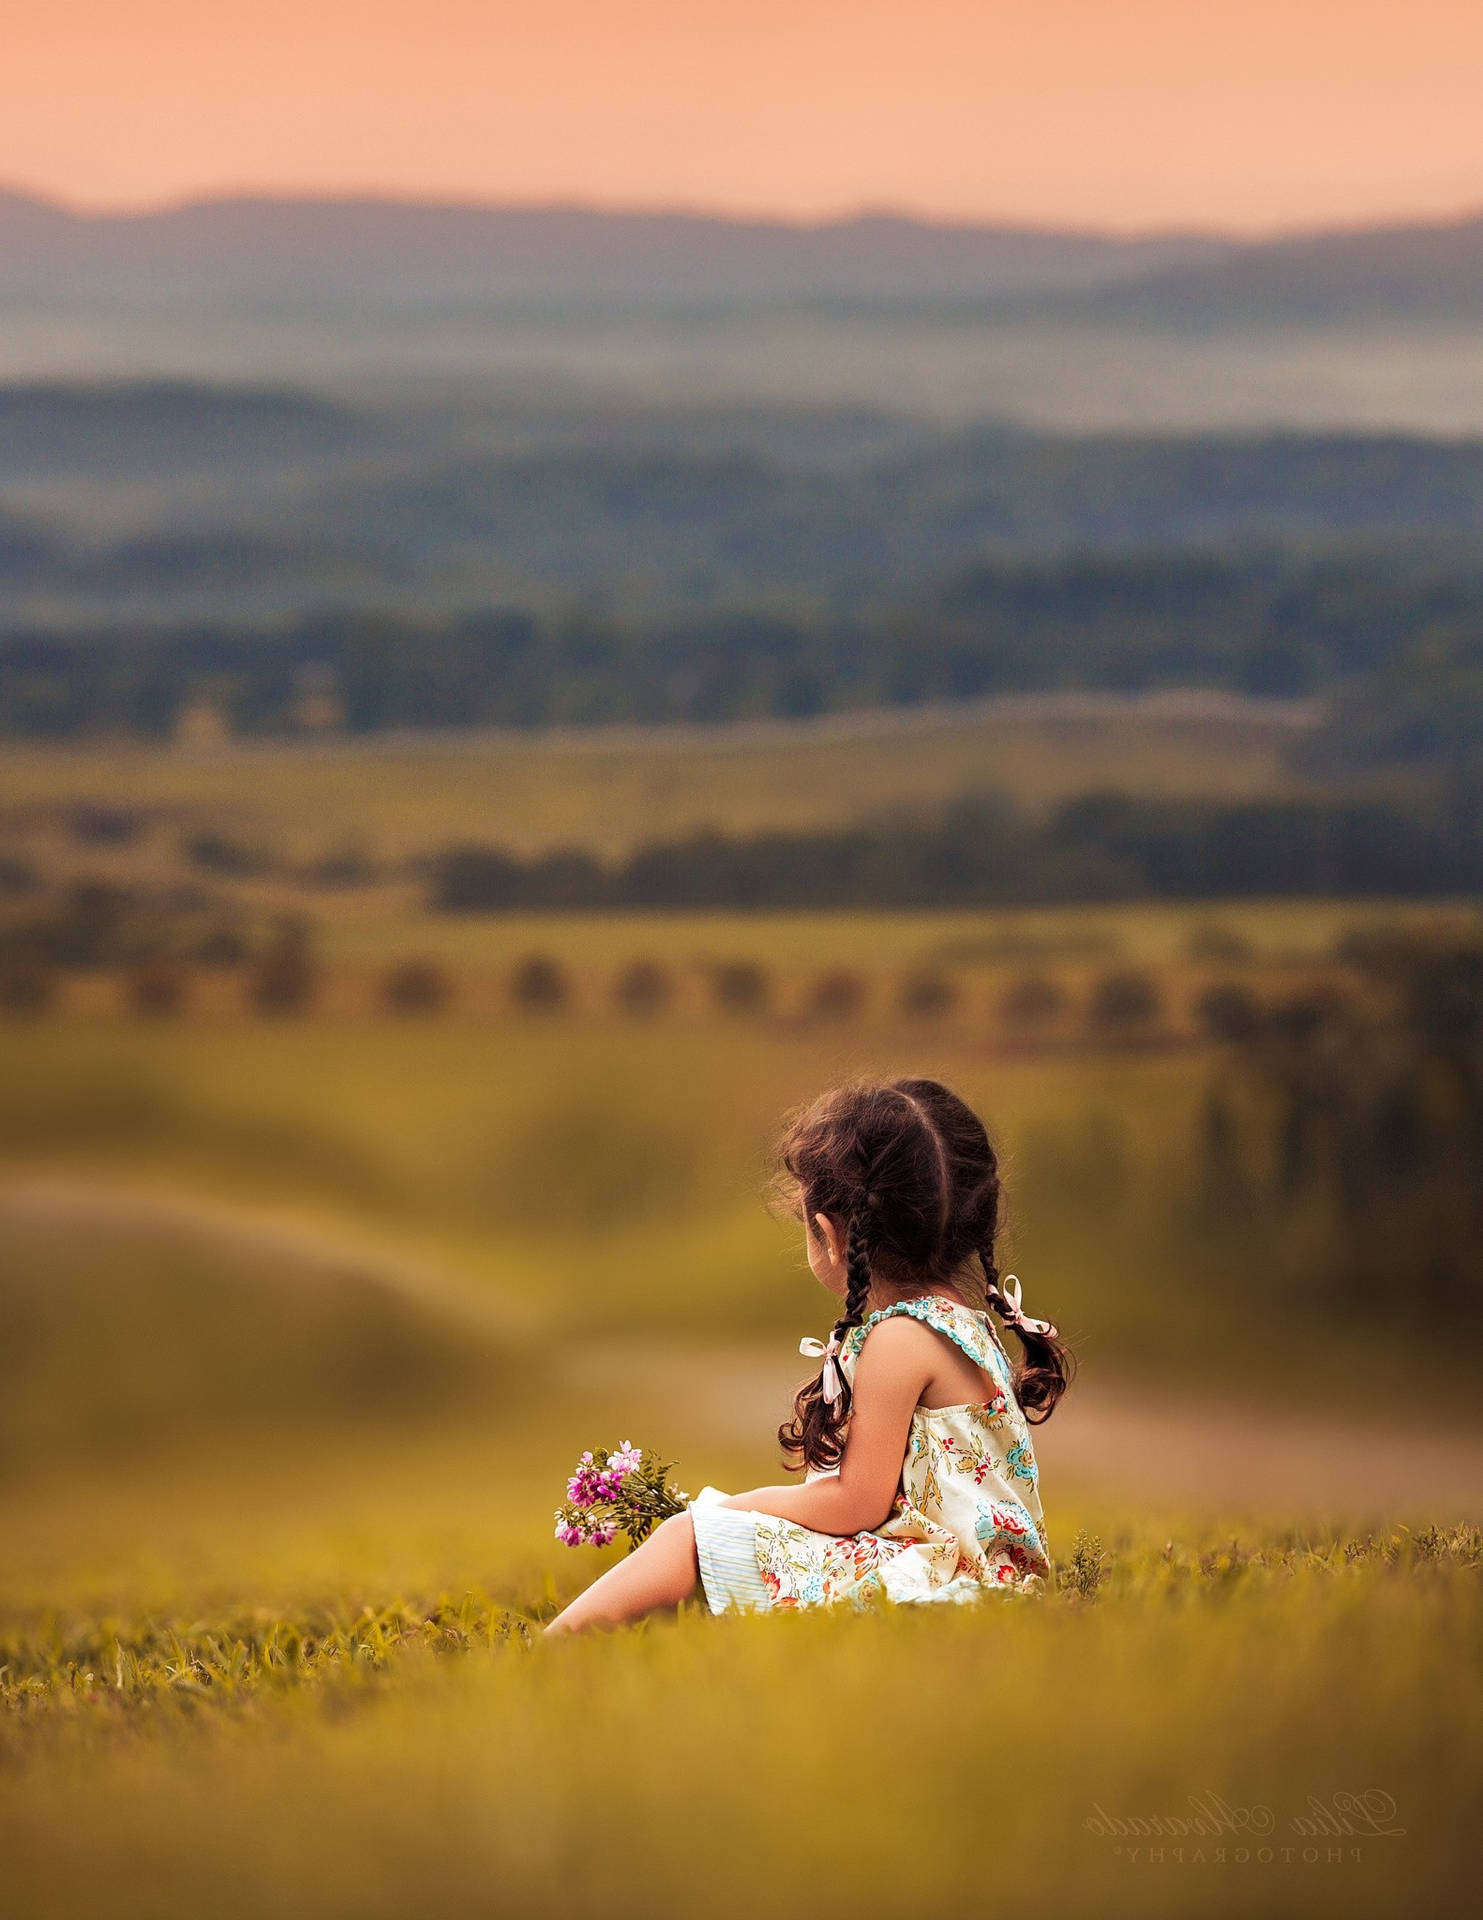 Child Holding Flowers In The Fields Wallpaper